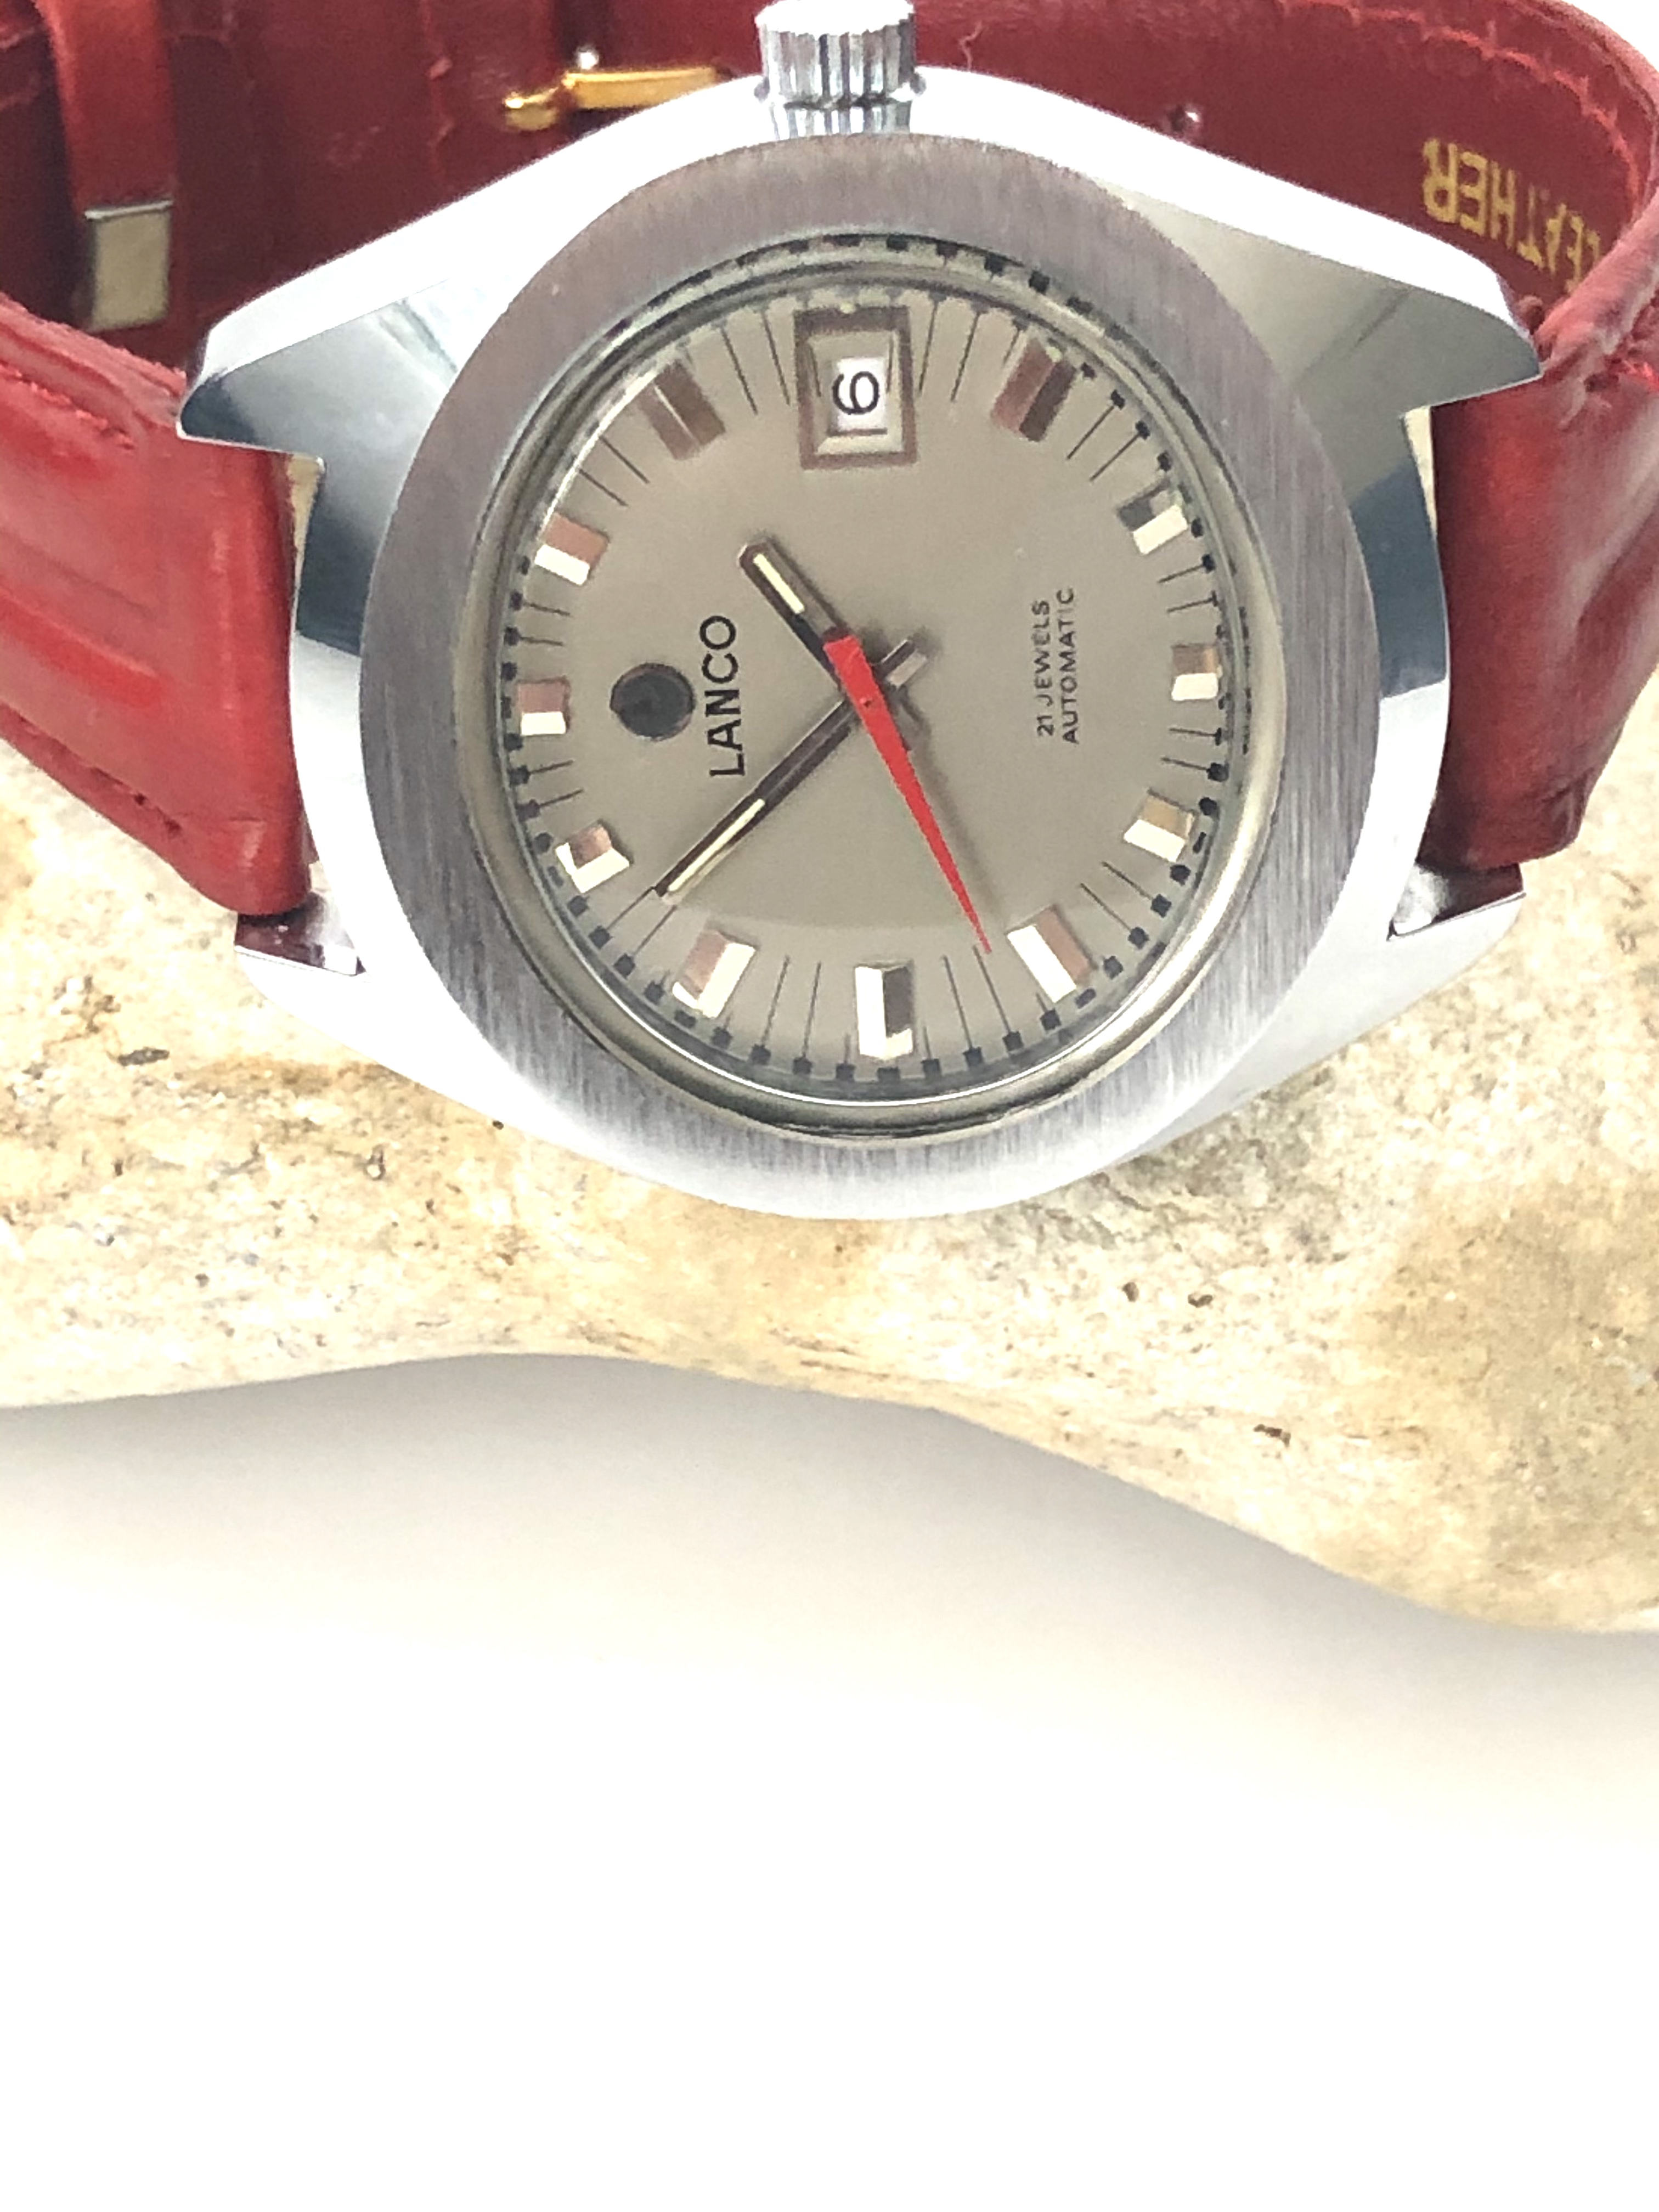 Amazing & Rare Vintage Lanco Swiss Watch - Like new condition collectors dream - Image 18 of 20